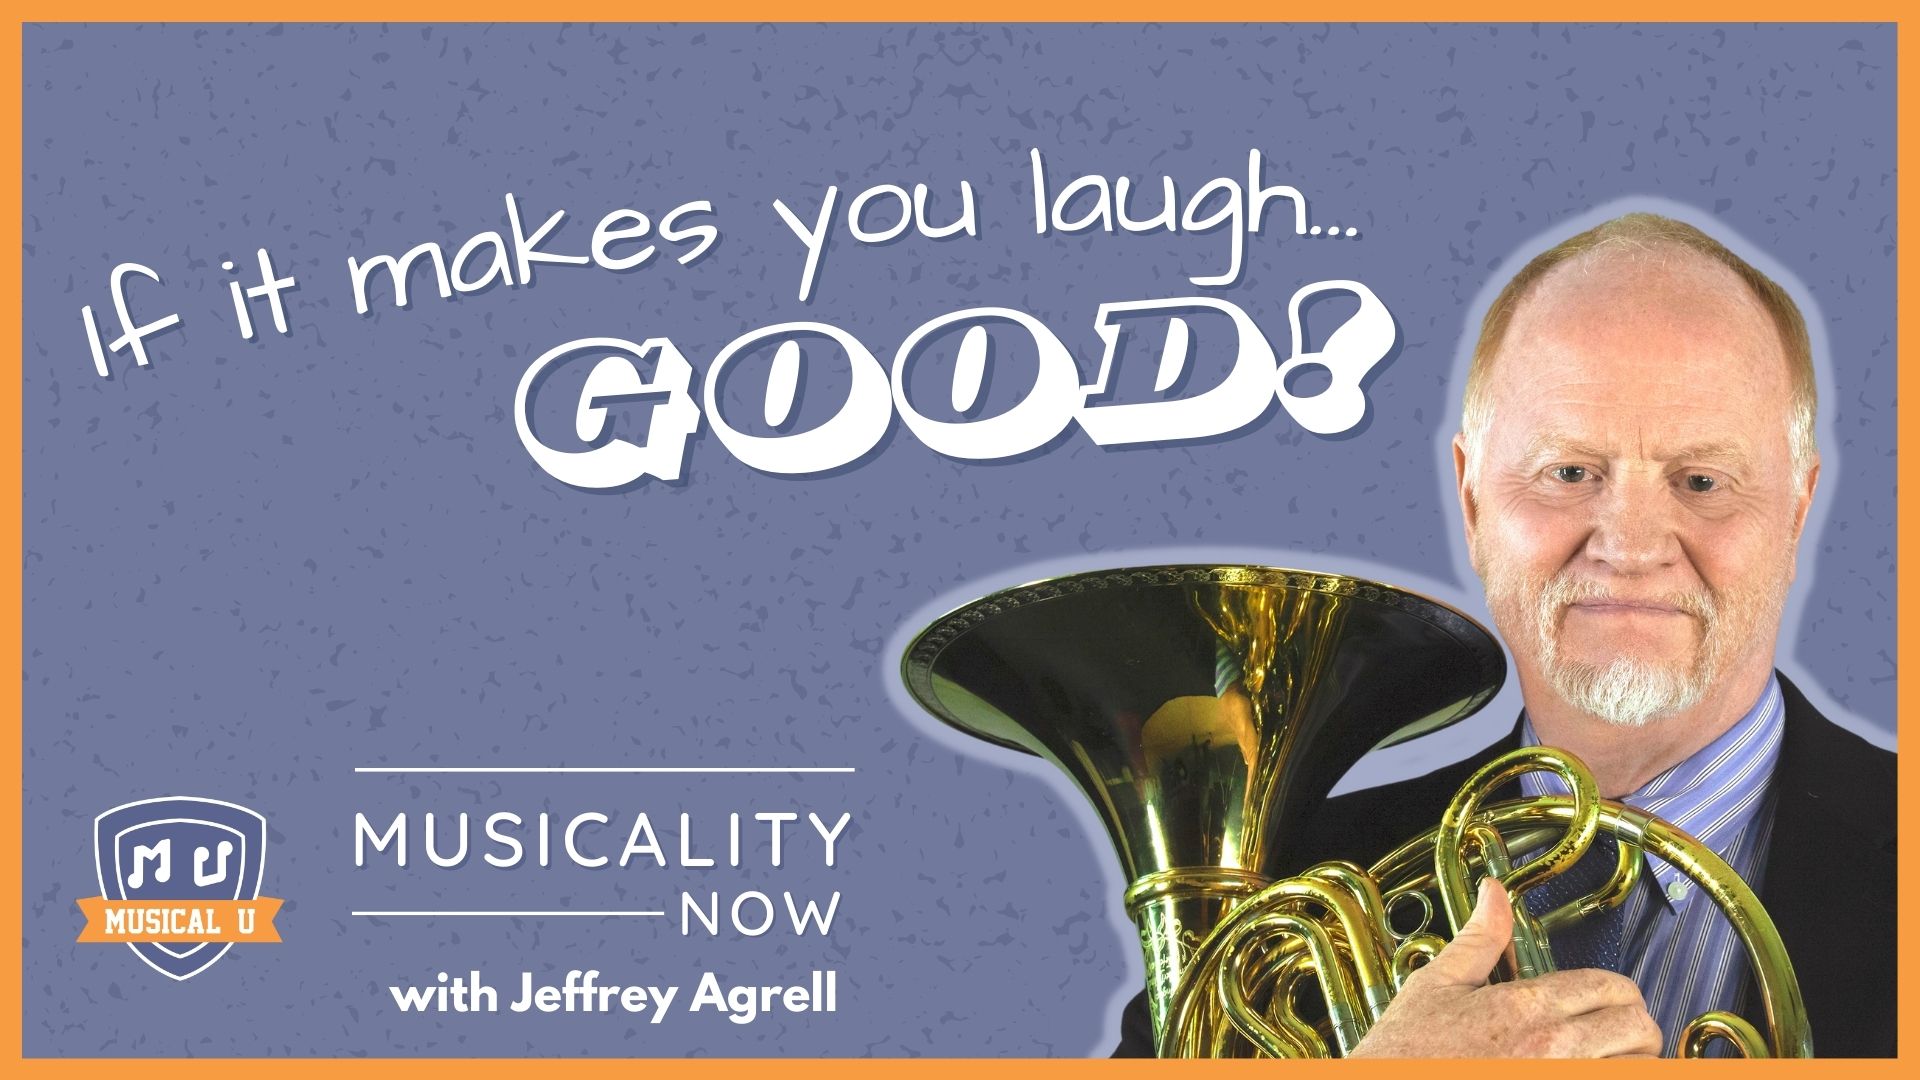 If it makes you laugh, GOOD! (with Jeffrey Agrell)